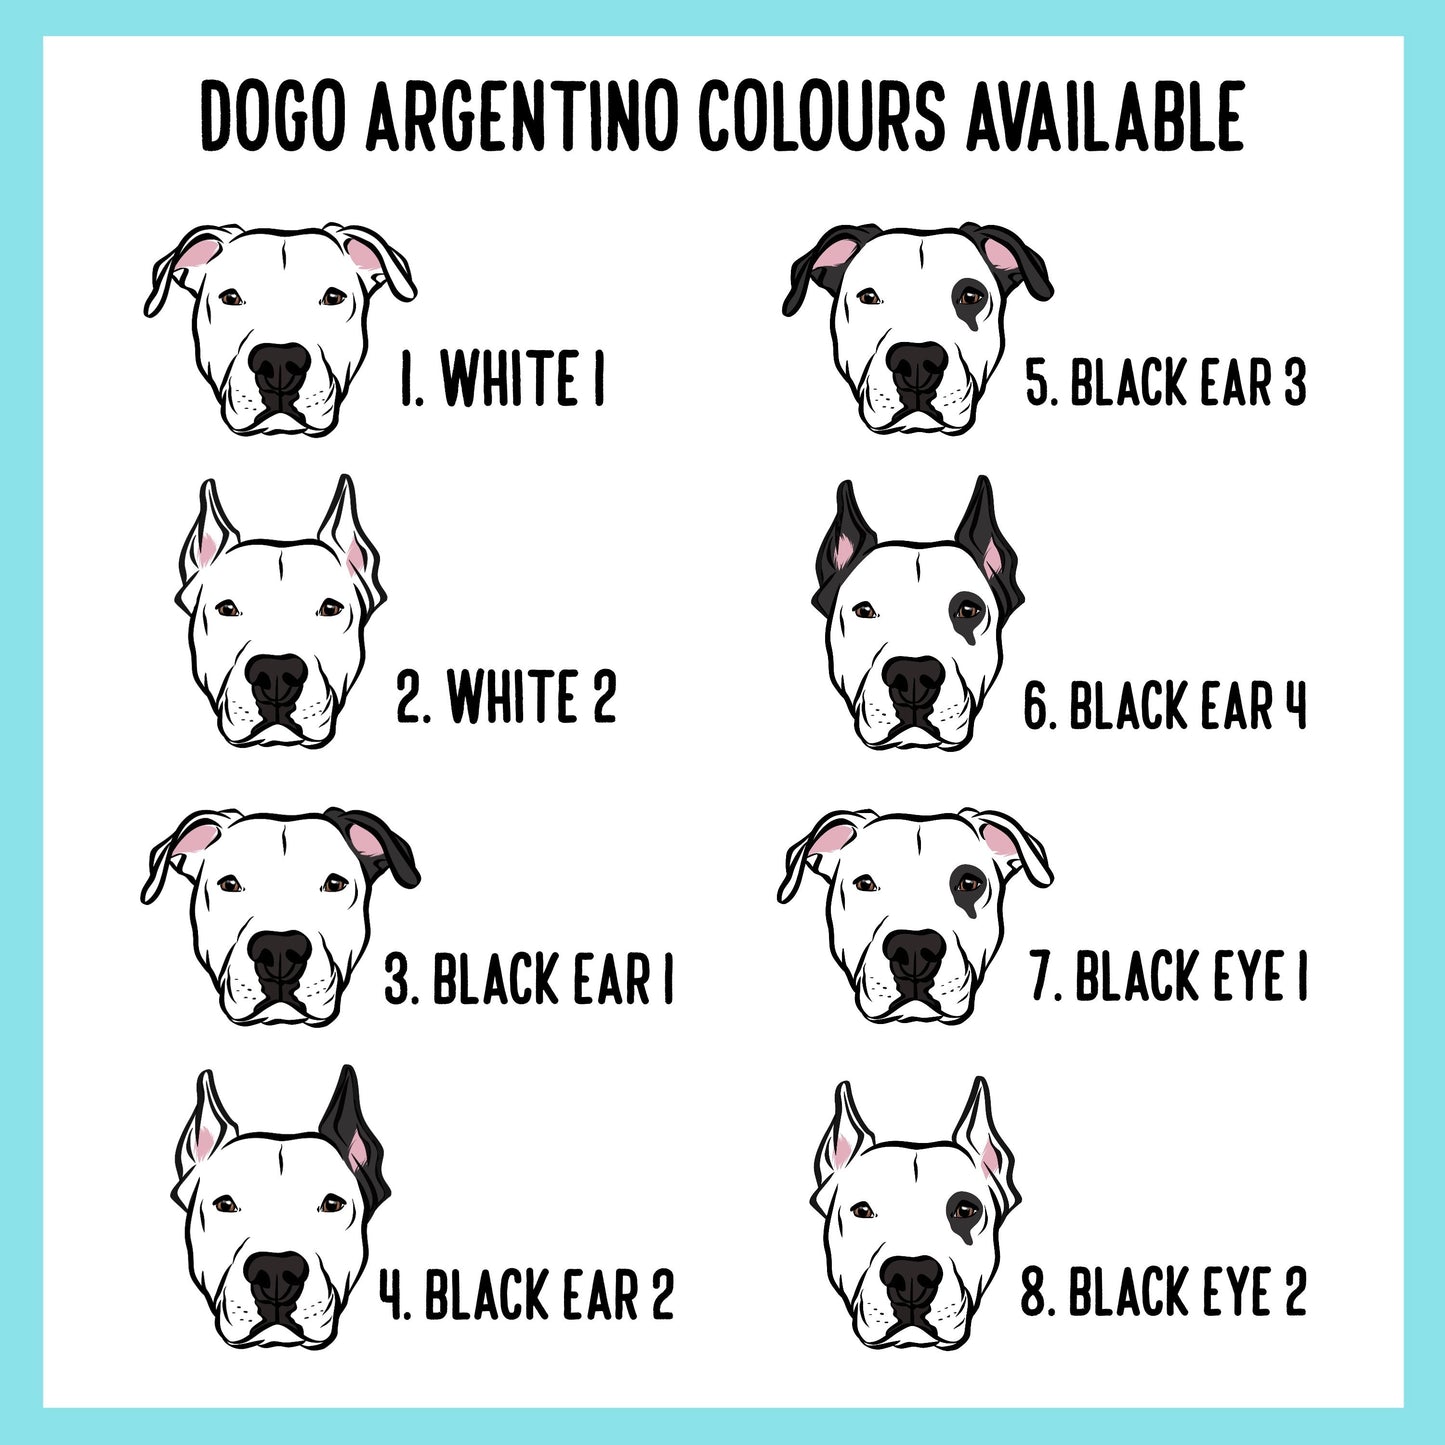 Dogo Argentino Mouse Mat